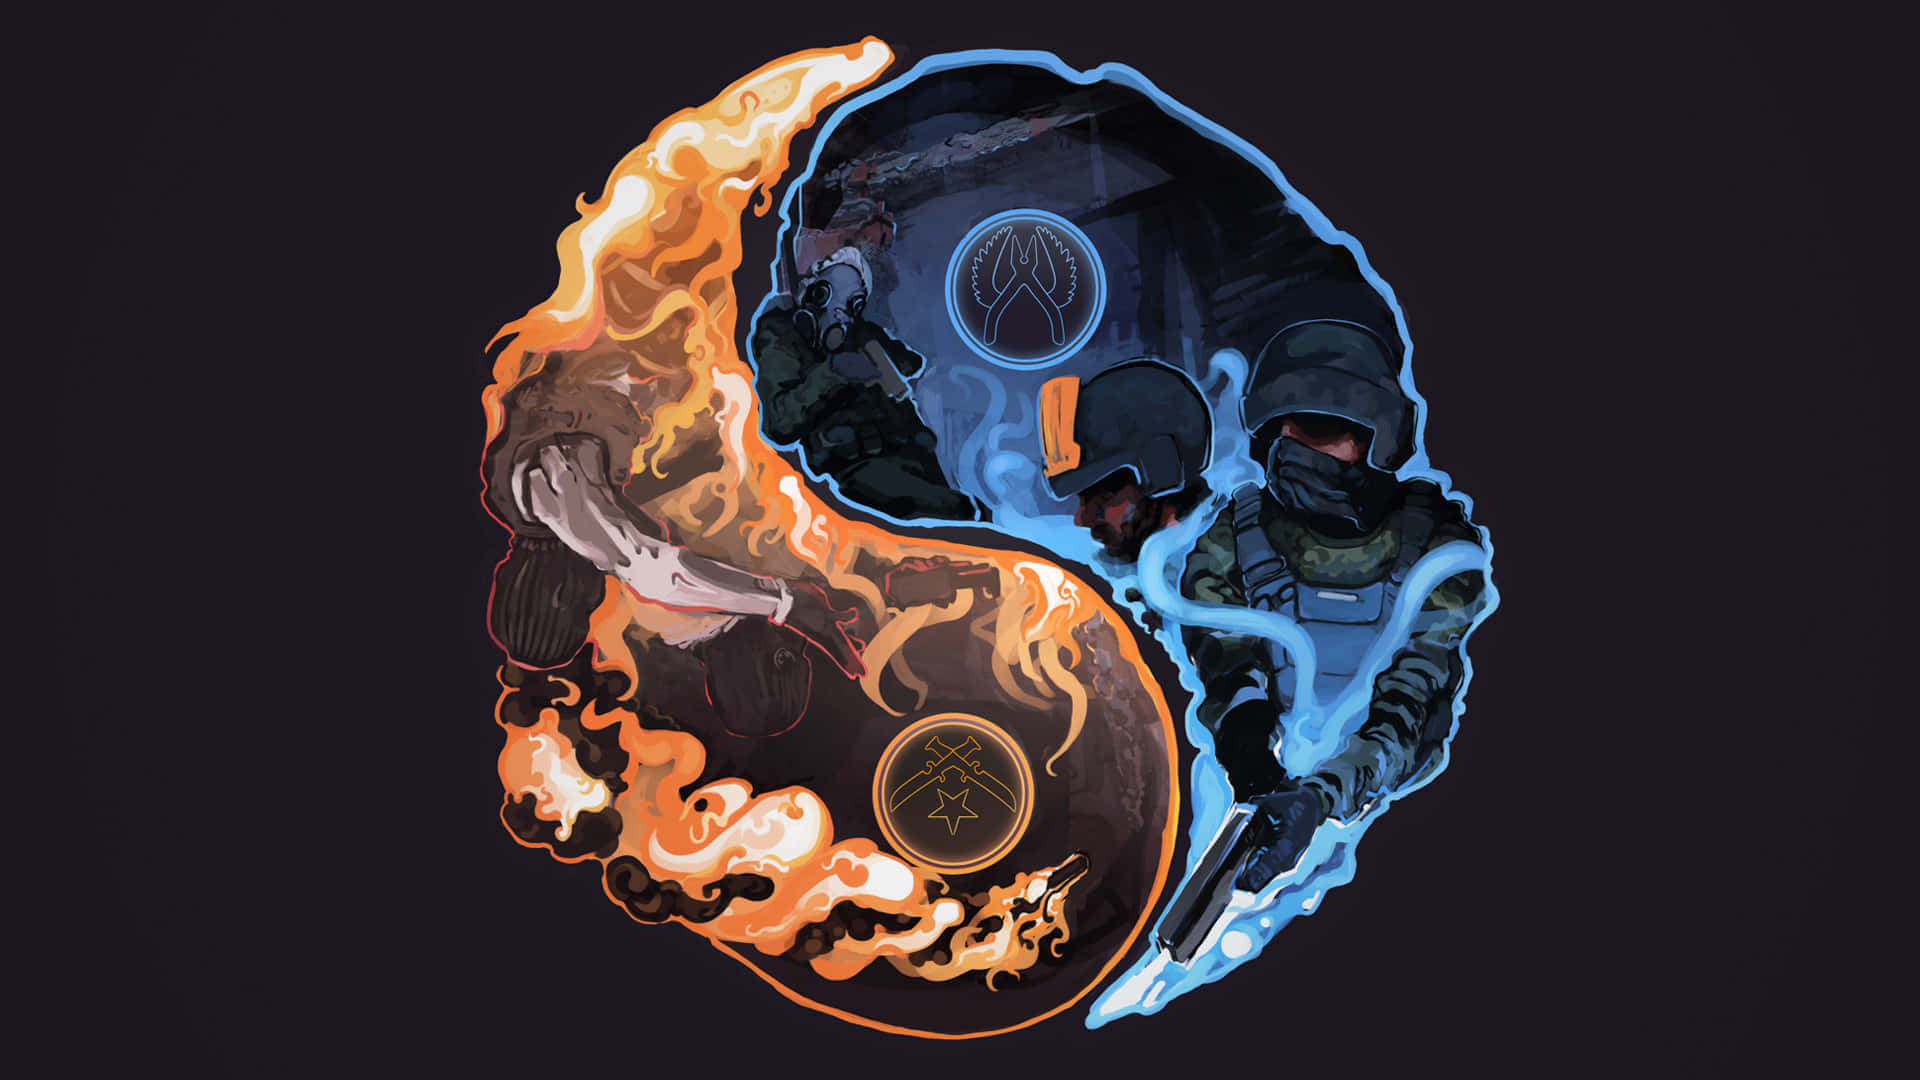 Yin Yang 1080p Counter Strike Global Offensive Background